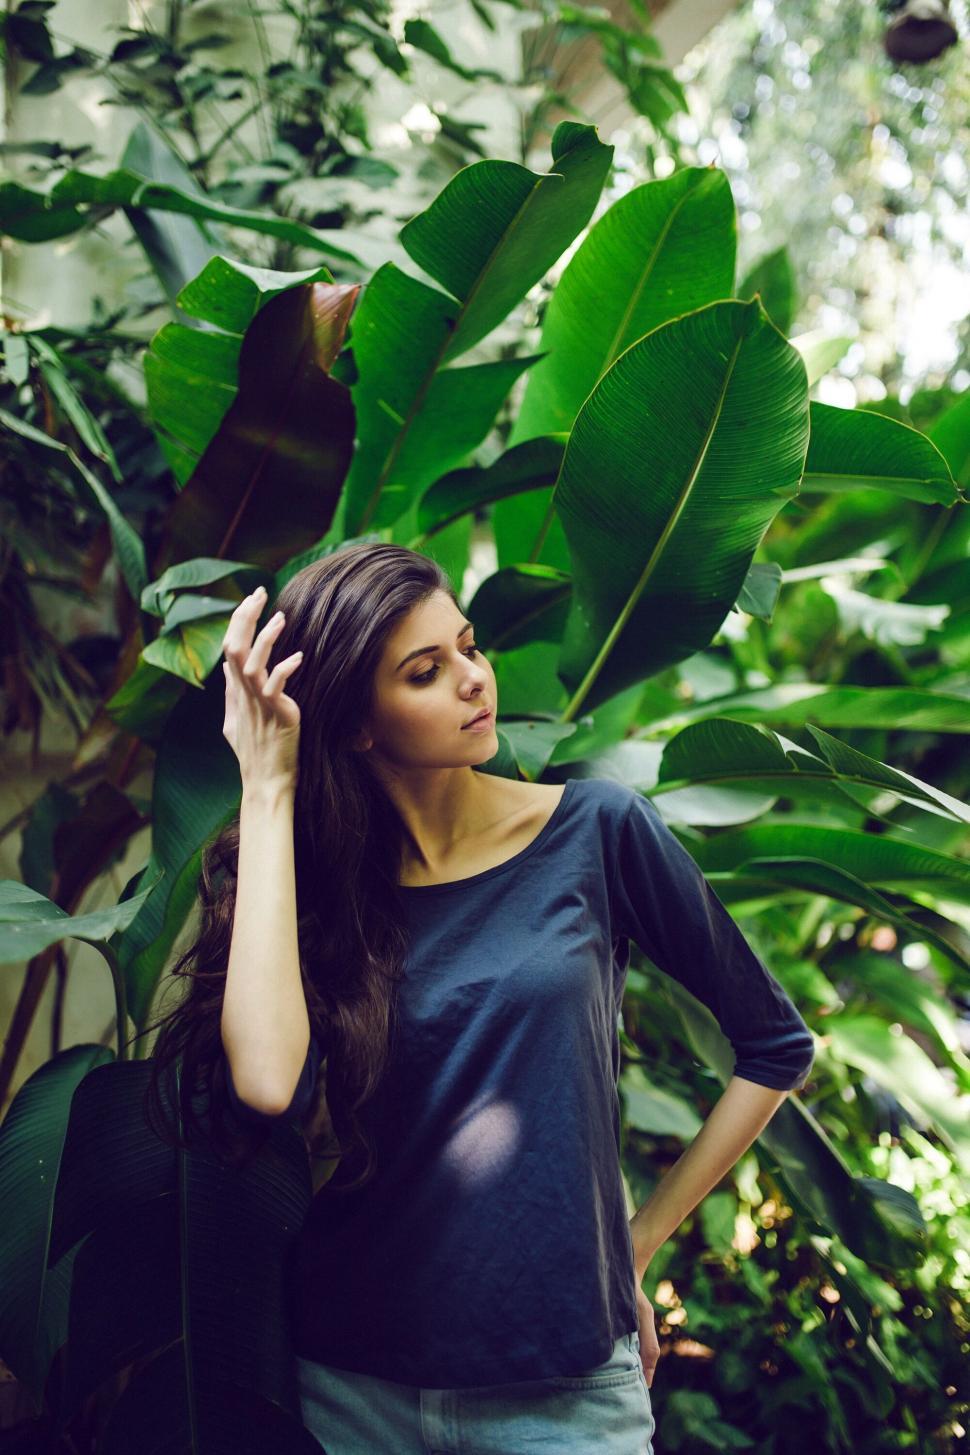 Free Image of Woman with hand in hair among leaves 